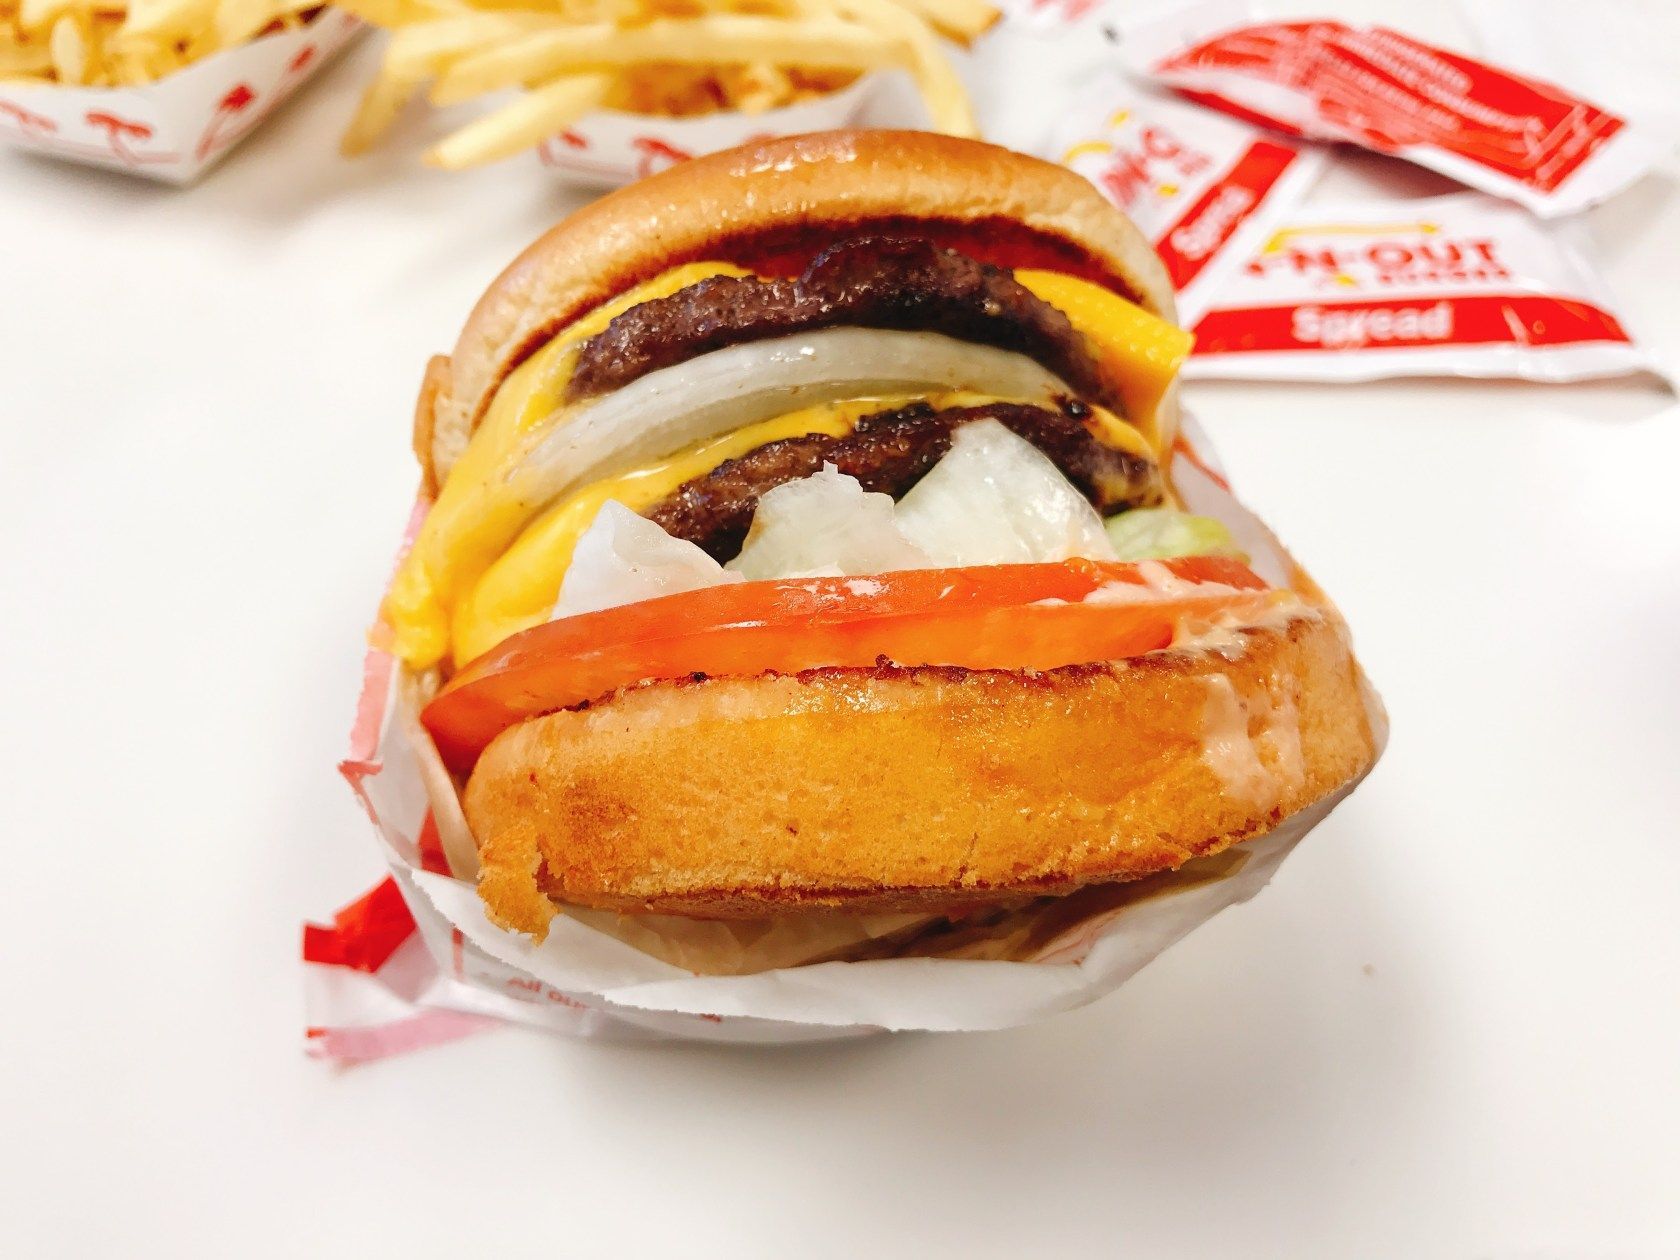 IN-N-OUT - 2